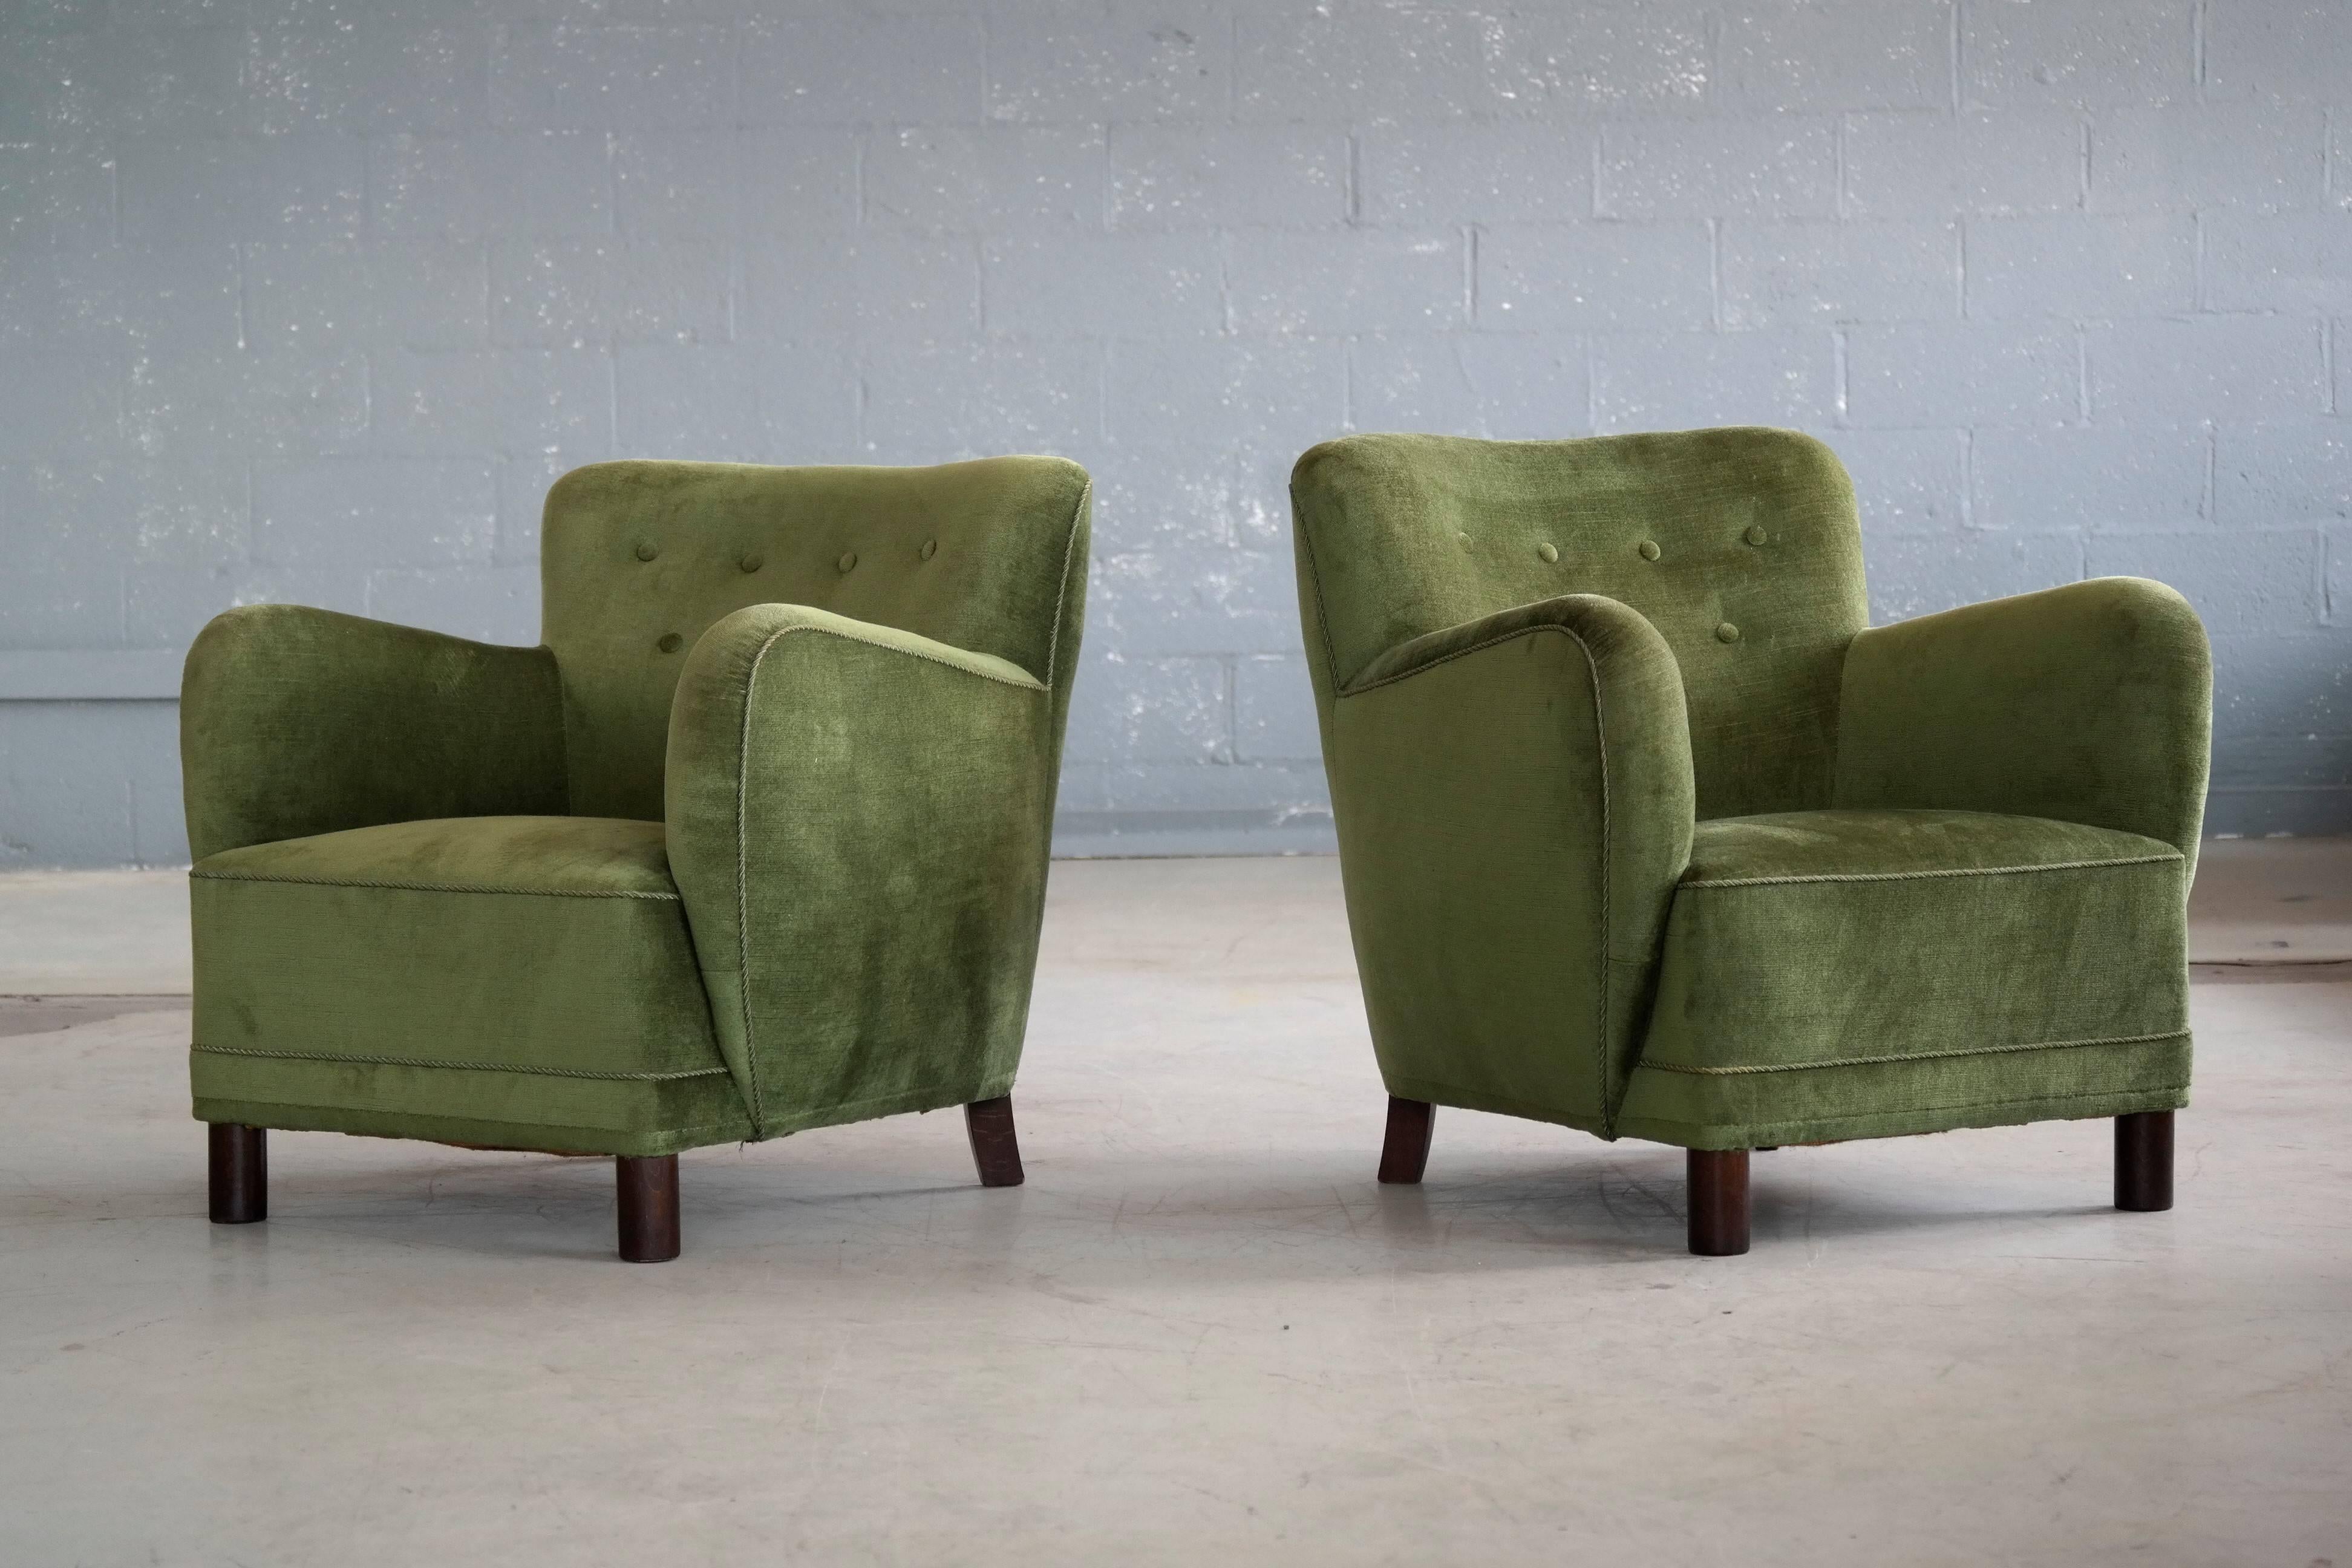 Rare to find Mogens Lassen attributed pair of low back lounge chairs from the 1940s featuring the rounded armrest design and the cylindrical front legs that are very characteristic of Lassen. Lassen's unique style is increasingly coveted and copied